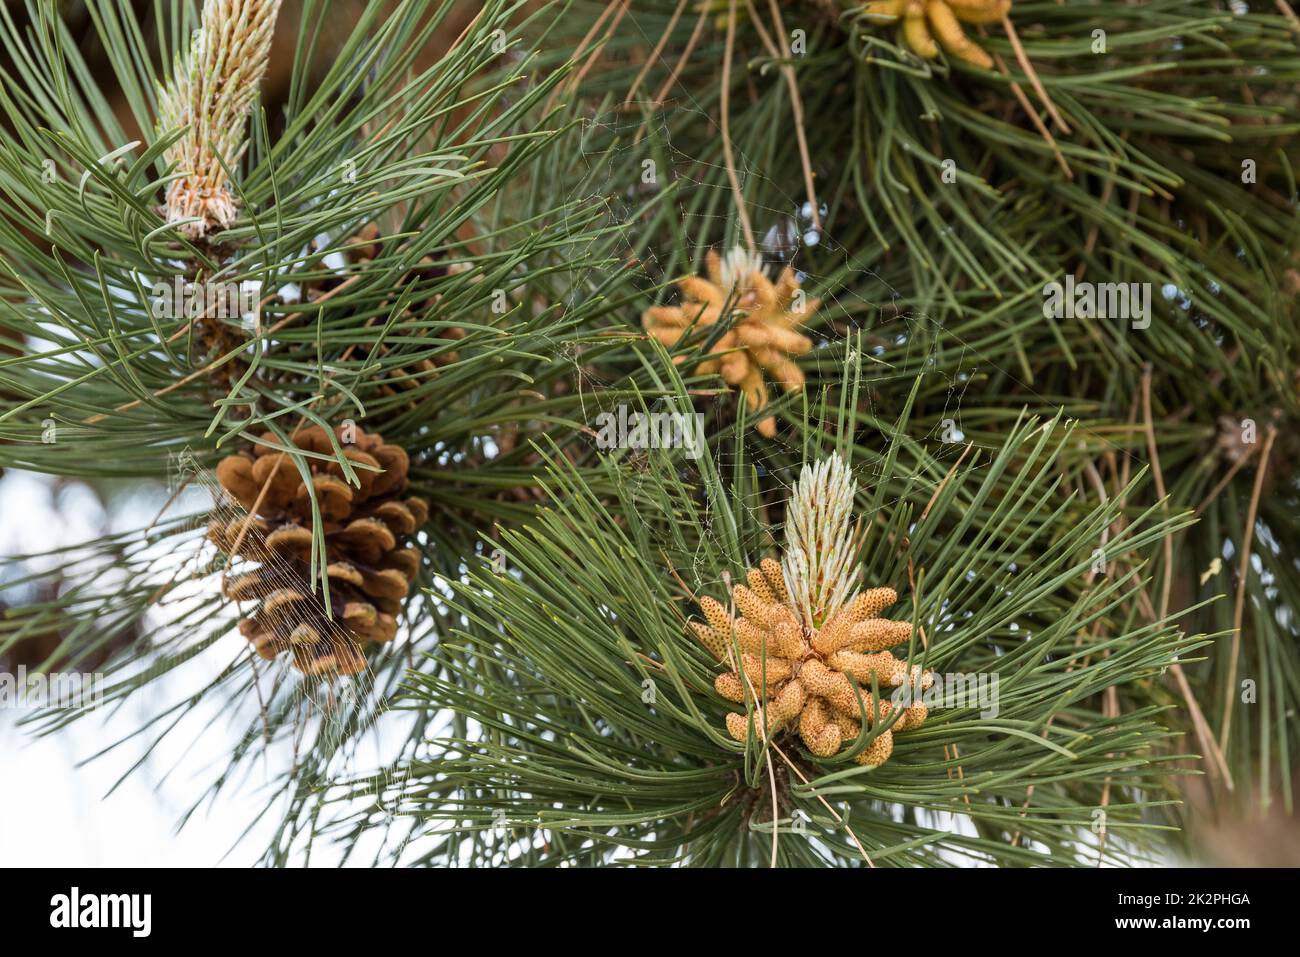 Pine - tree in seed pod and inflorescence, pine cone Stock Photo